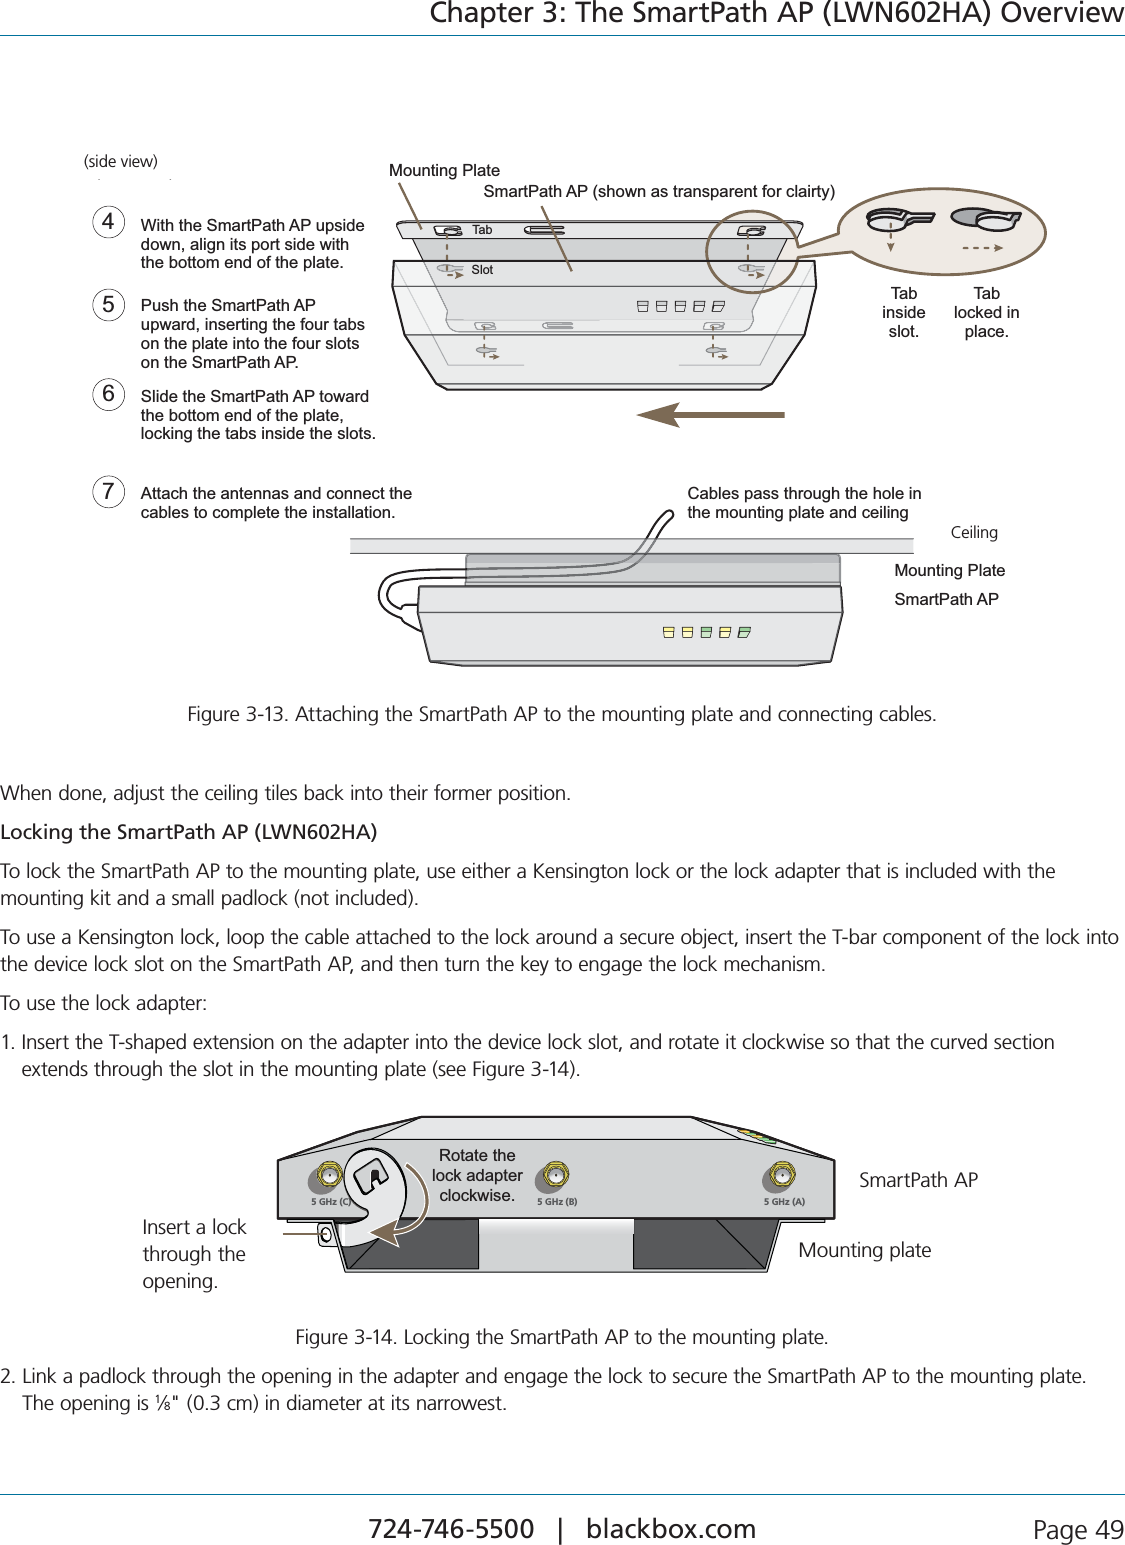 724-746-5500   |   blackbox.com  Page 49Chapter 3: The SmartPath AP (LWN602HA) OverviewWith the SmartPath AP upside down, align its port side with the bottom end of the plate.Push the SmartPath AP upward, inserting the four tabs on the plate into the four slots on the SmartPath AP.Slide the SmartPath AP toward the bottom end of the plate, locking the tabs inside the slots.Attach the antennas and connect the cables to complete the installation.4675Tab inside slot.Tab locked in place.Mounting PlateSmartPath AP (shown as transparent for clairty)TabSlot(side view)Mounting PlateSmartPath APCeilingCables pass through the hole in the mounting plate and ceilingCeiling(side view)Figure 3-13. Attaching the SmartPath AP to the mounting plate and connecting cables.When done, adjust the ceiling tiles back into their former position.Locking the SmartPath AP (LWN602HA)To lock the SmartPath AP to the mounting plate, use either a Kensington lock or the lock adapter that is included with the  mounting kit and a small padlock (not included).To use a Kensington lock, loop the cable attached to the lock around a secure object, insert the T-bar component of the lock into the device lock slot on the SmartPath AP, and then turn the key to engage the lock mechanism.To use the lock adapter:1.  Insert the T-shaped extension on the adapter into the device lock slot, and rotate it clockwise so that the curved section extends through the slot in the mounting plate (see Figure 3-14).5 GHz (A)5 GHz (B)5 GHz (C))Rotate the lock adapter clockwise.Insert a lock through the opening.SmartPath APMounting plateInsert a lock through the opening.Figure 3-14. Locking the SmartPath AP to the mounting plate.2.  Link a padlock through the opening in the adapter and engage the lock to secure the SmartPath AP to the mounting plate.  The opening is 1⁄8&quot; (0.3 cm) in diameter at its narrowest.